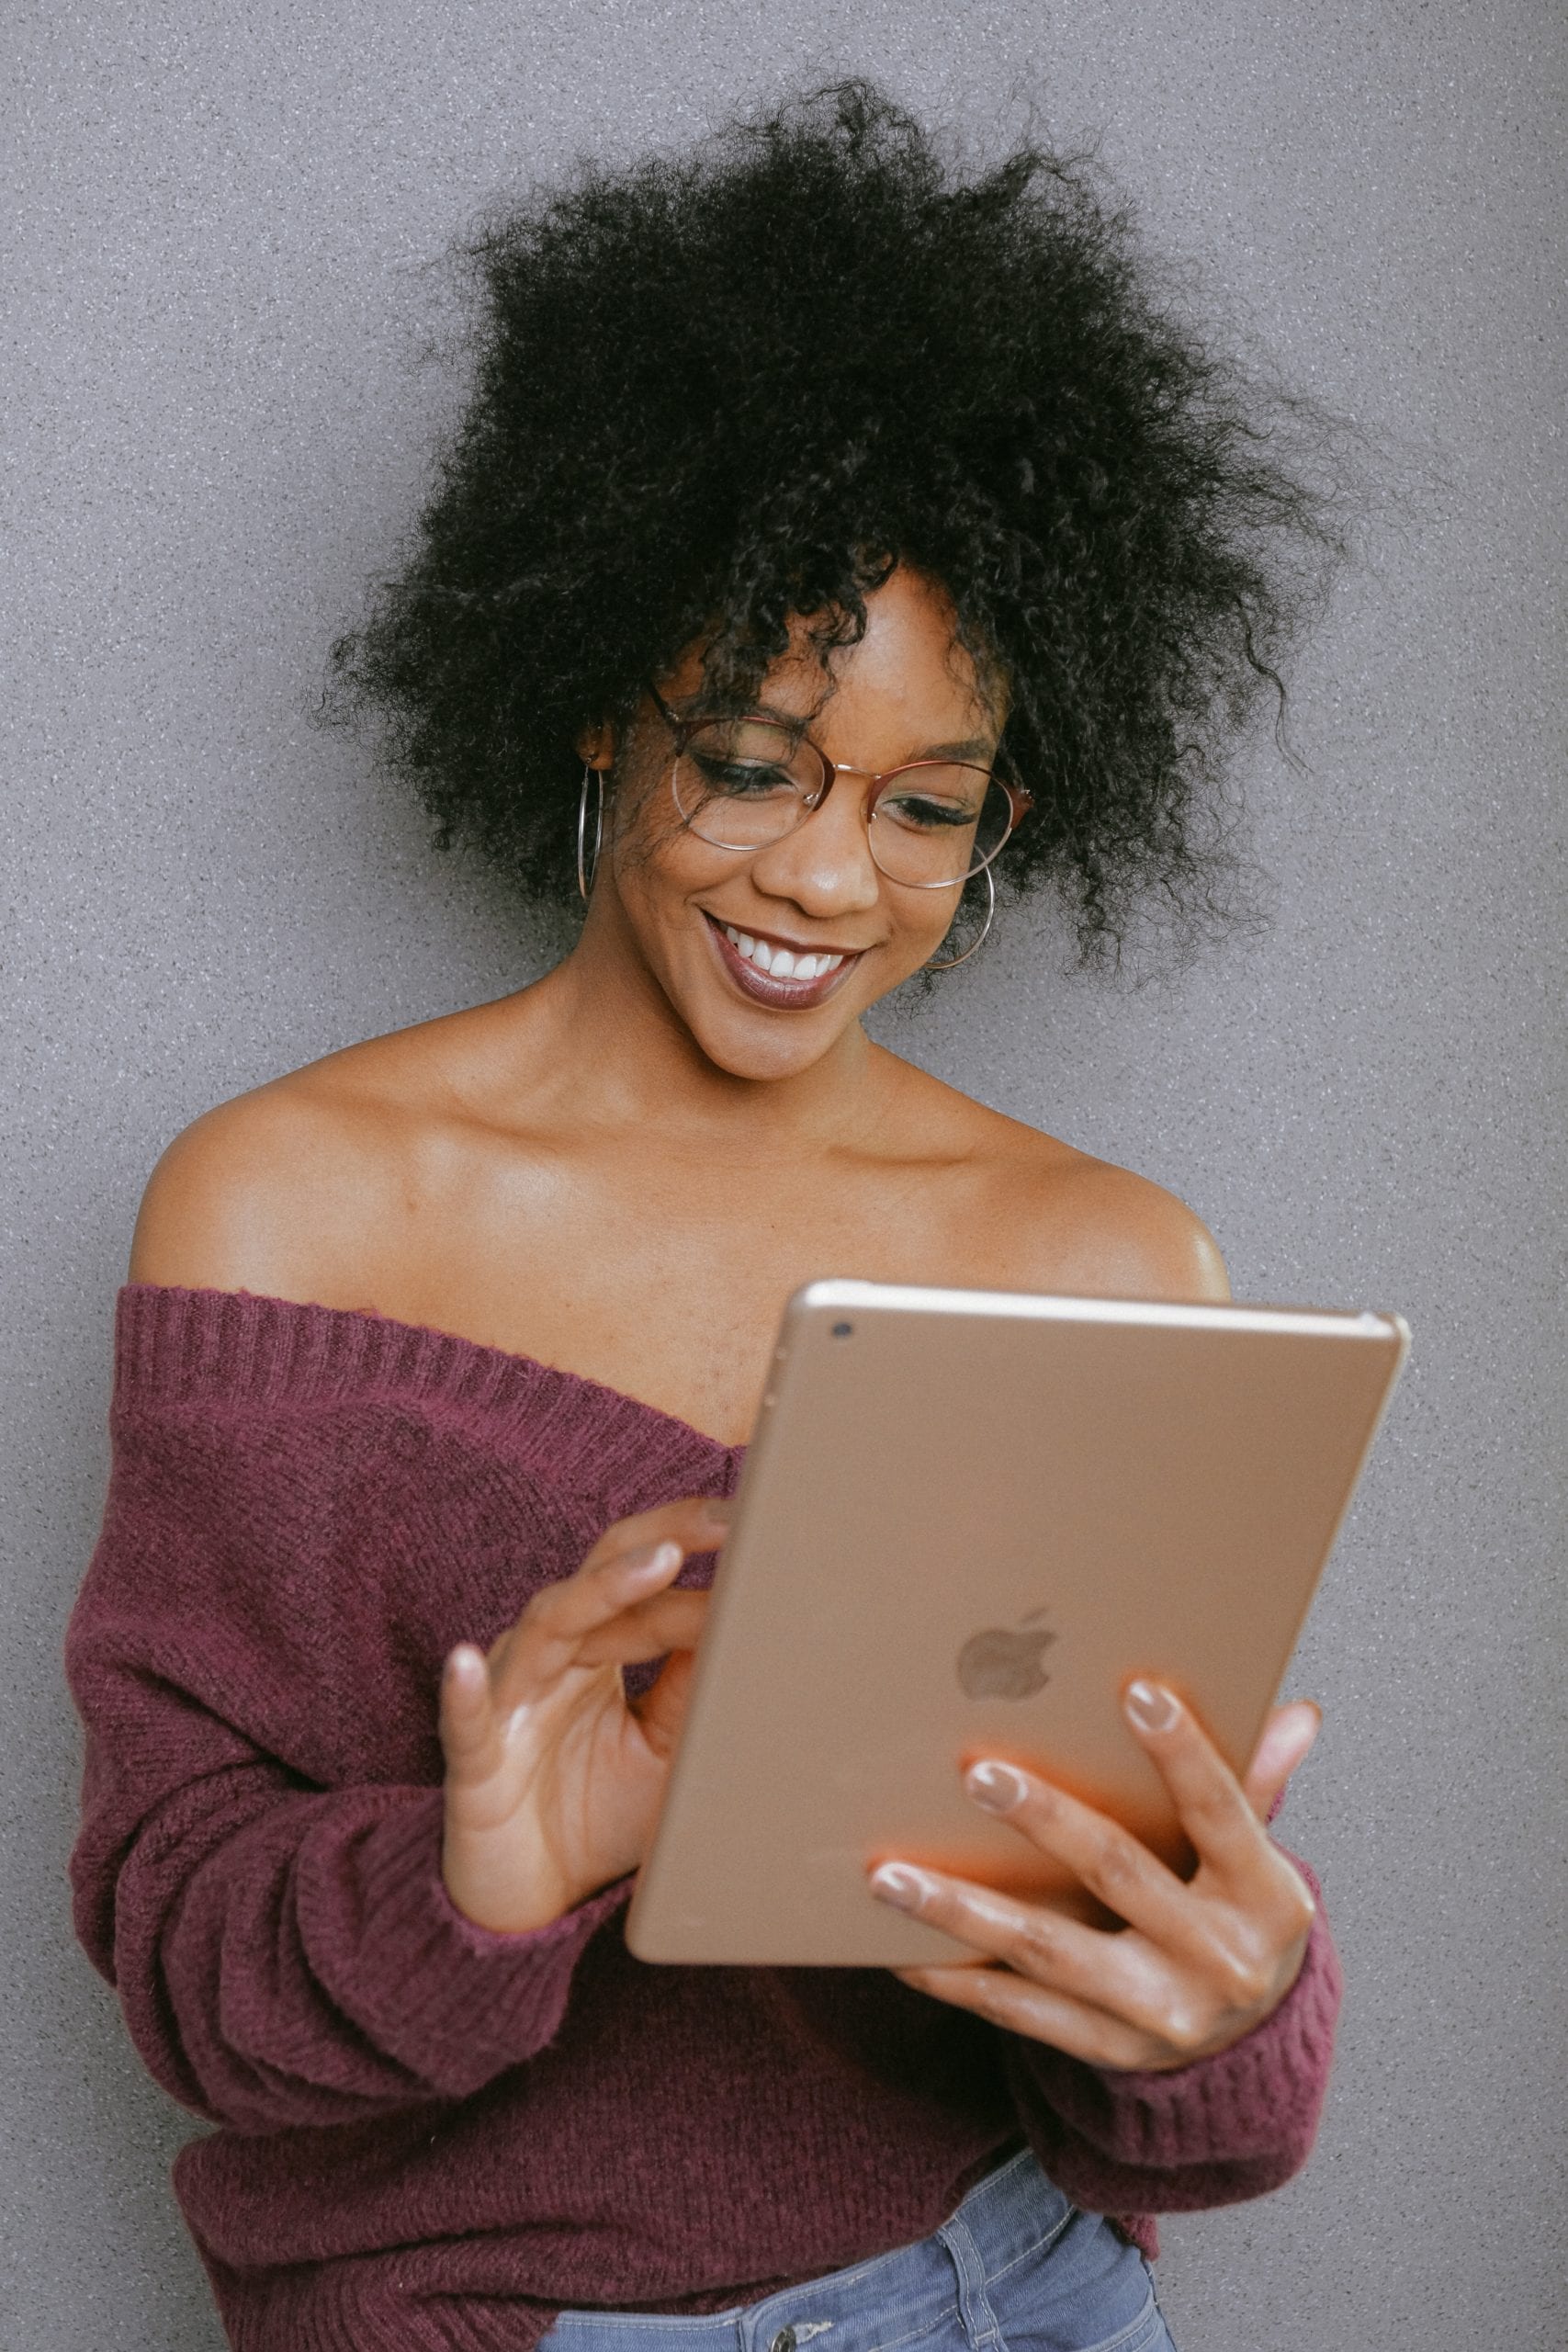 A woman cheerfully reading content on her tablet